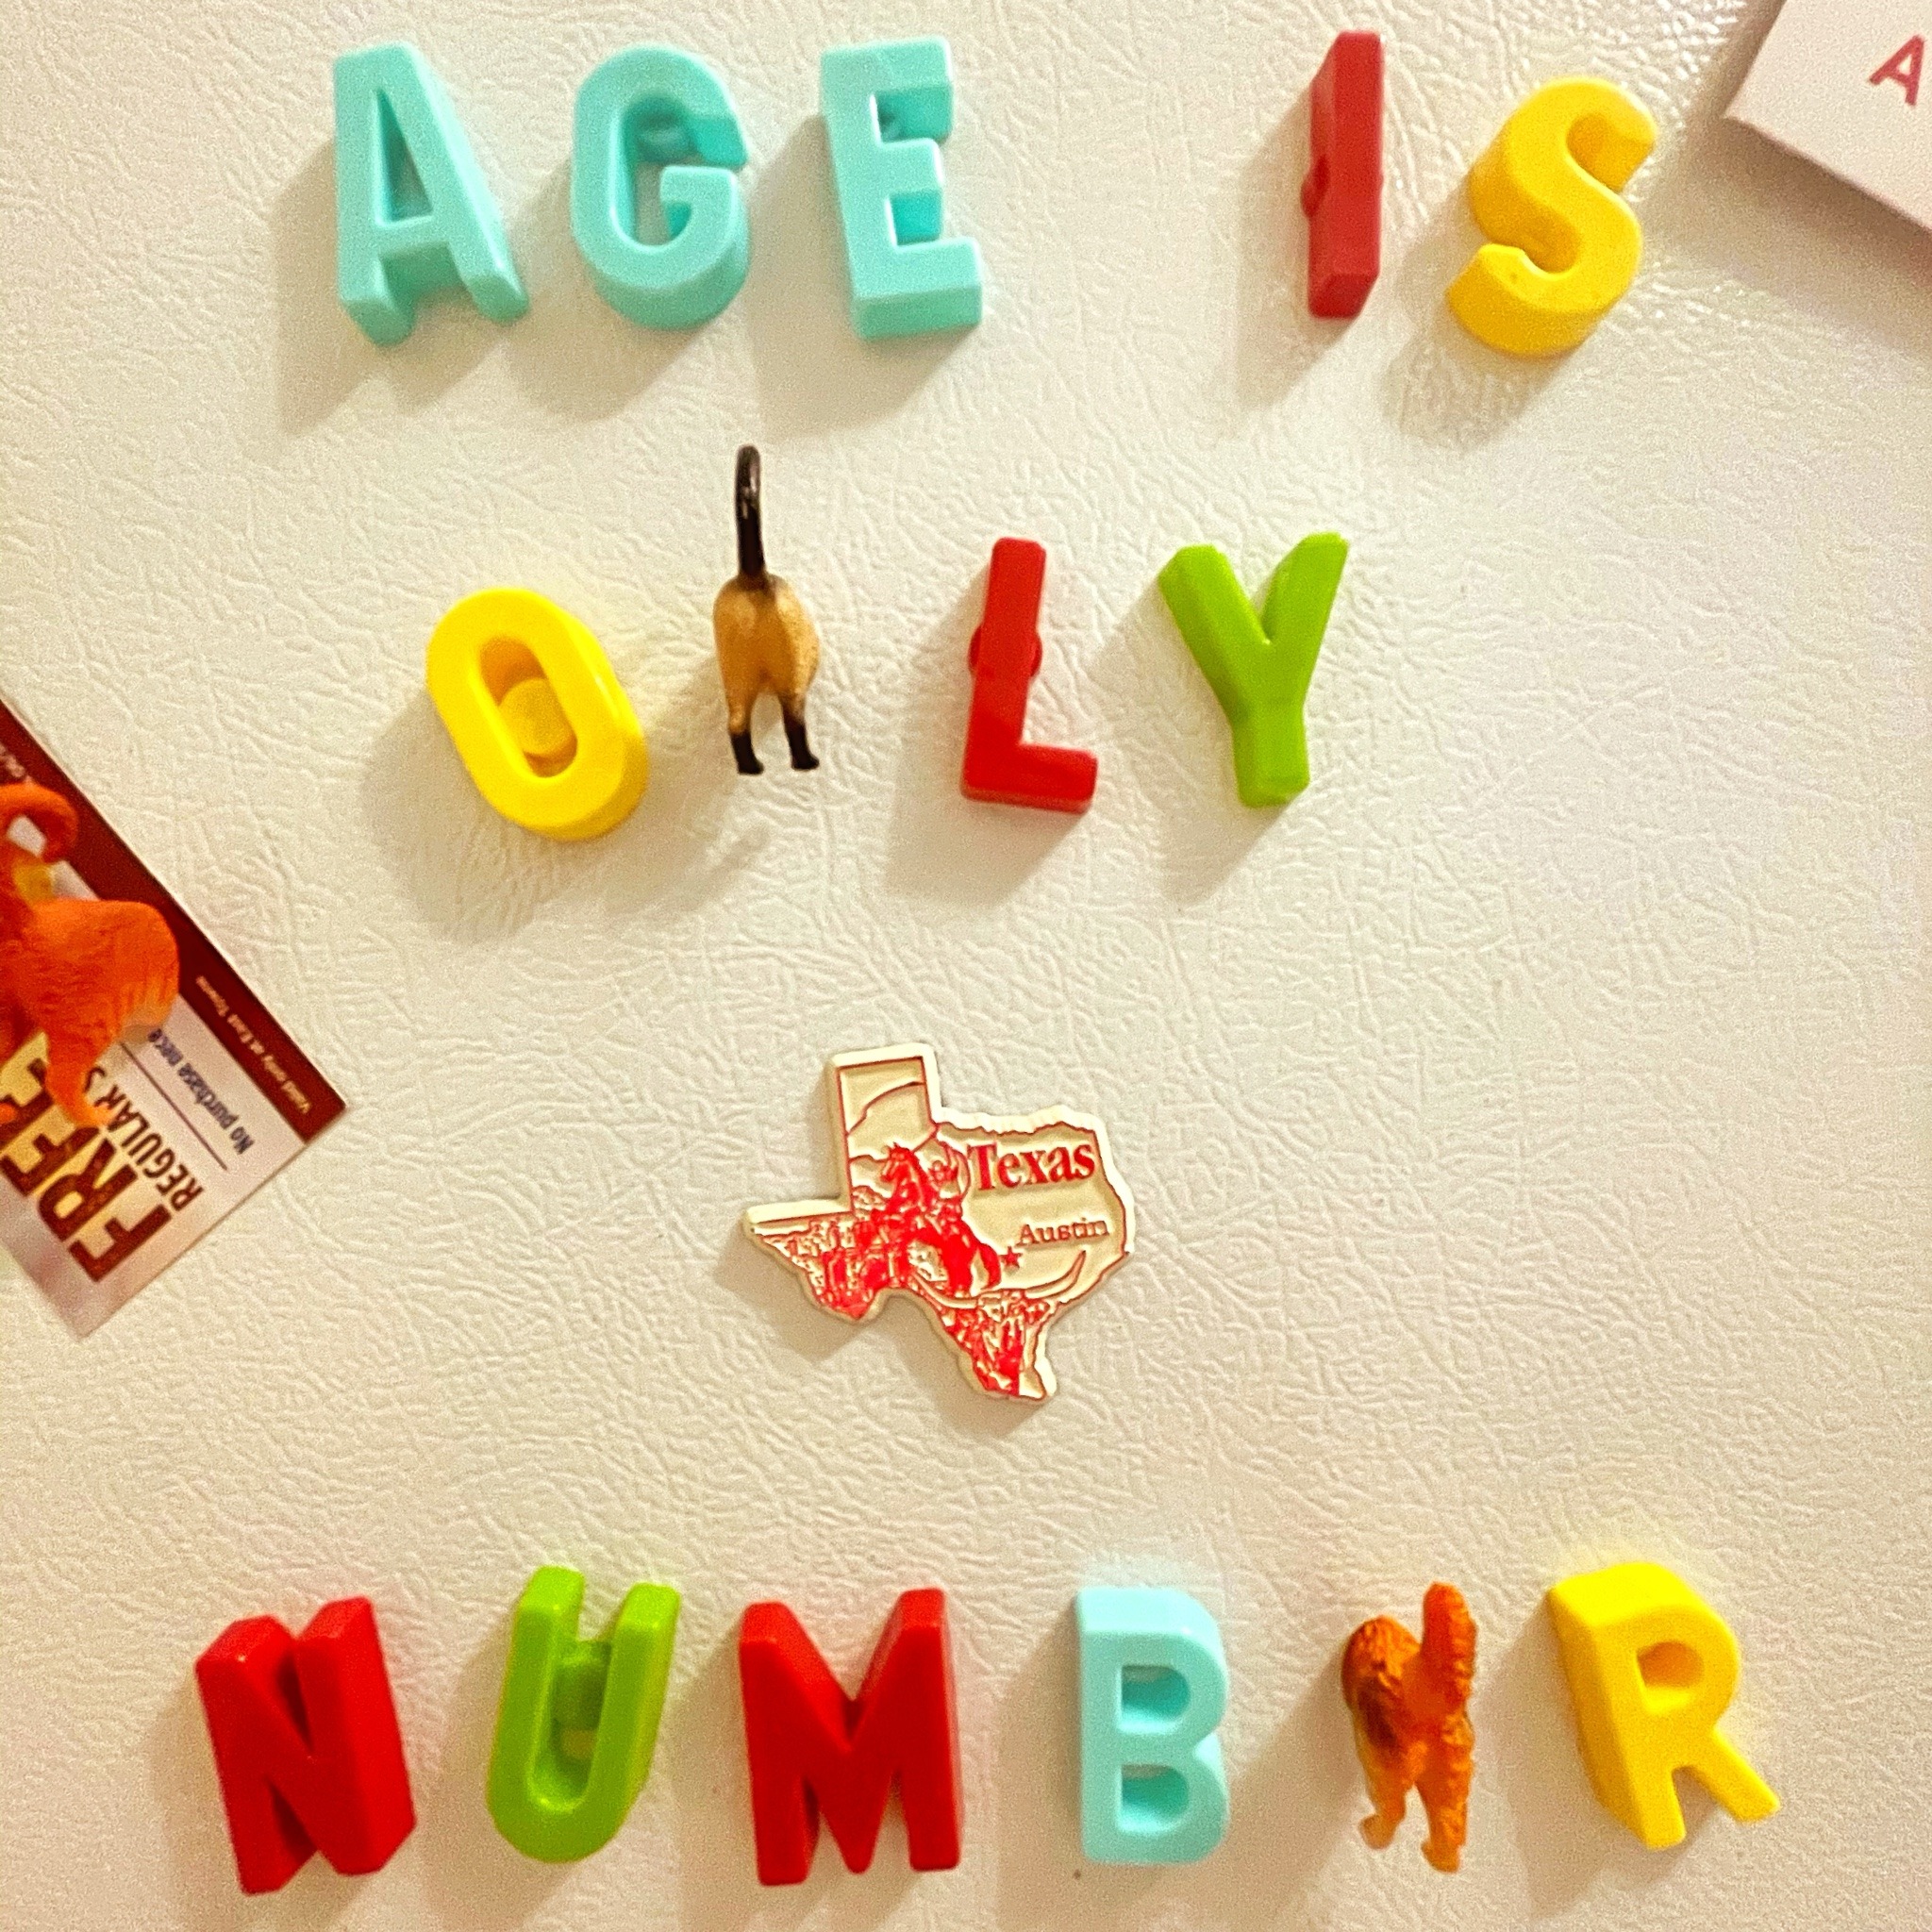 Age is just a number tumblr